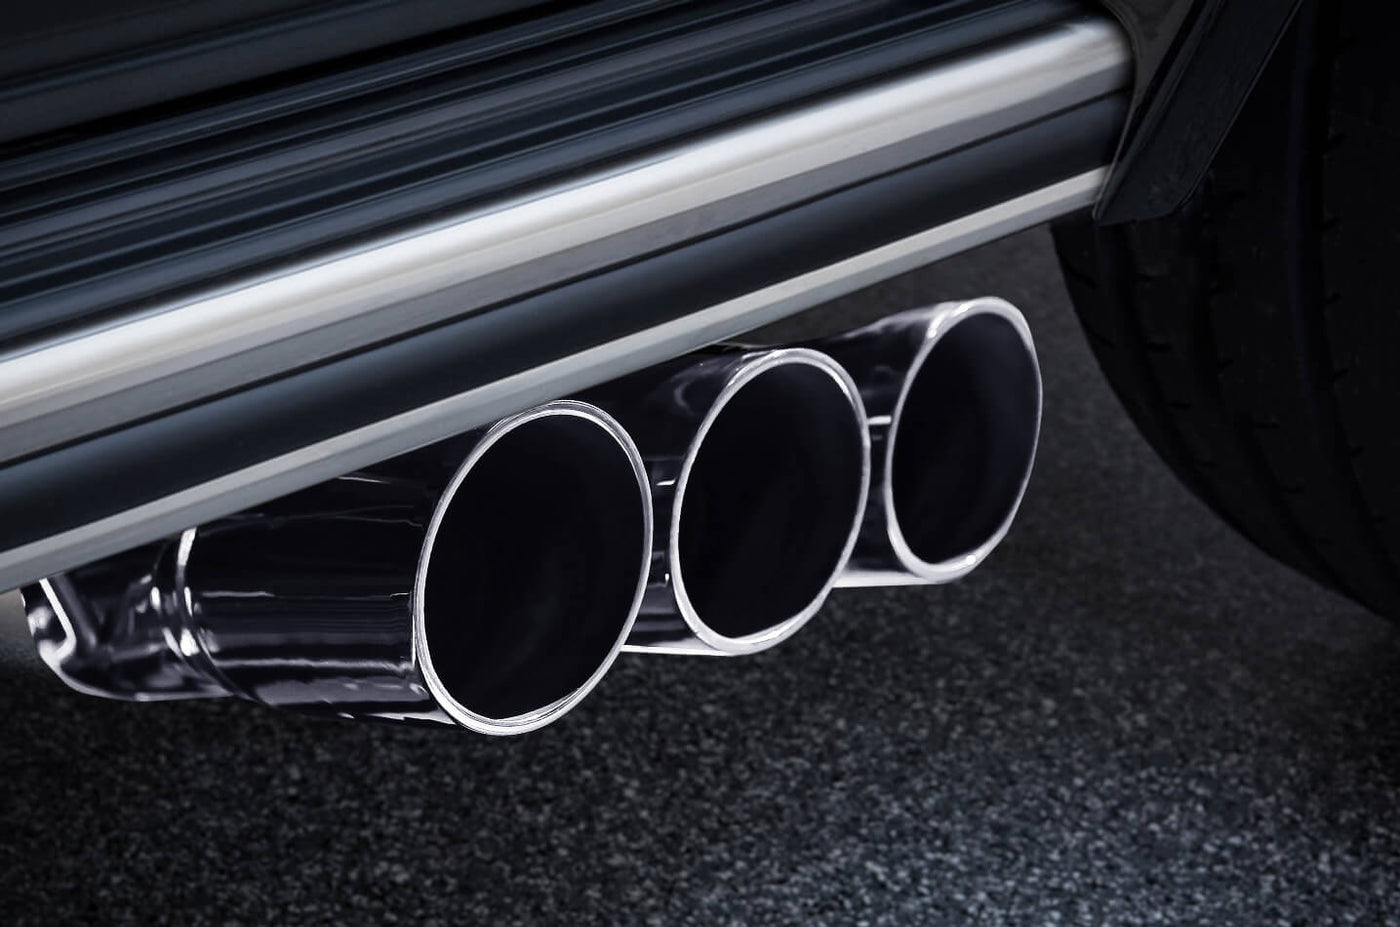 ipe-mercedes-benz-amg-g500-w463a-w464-exhaust-system